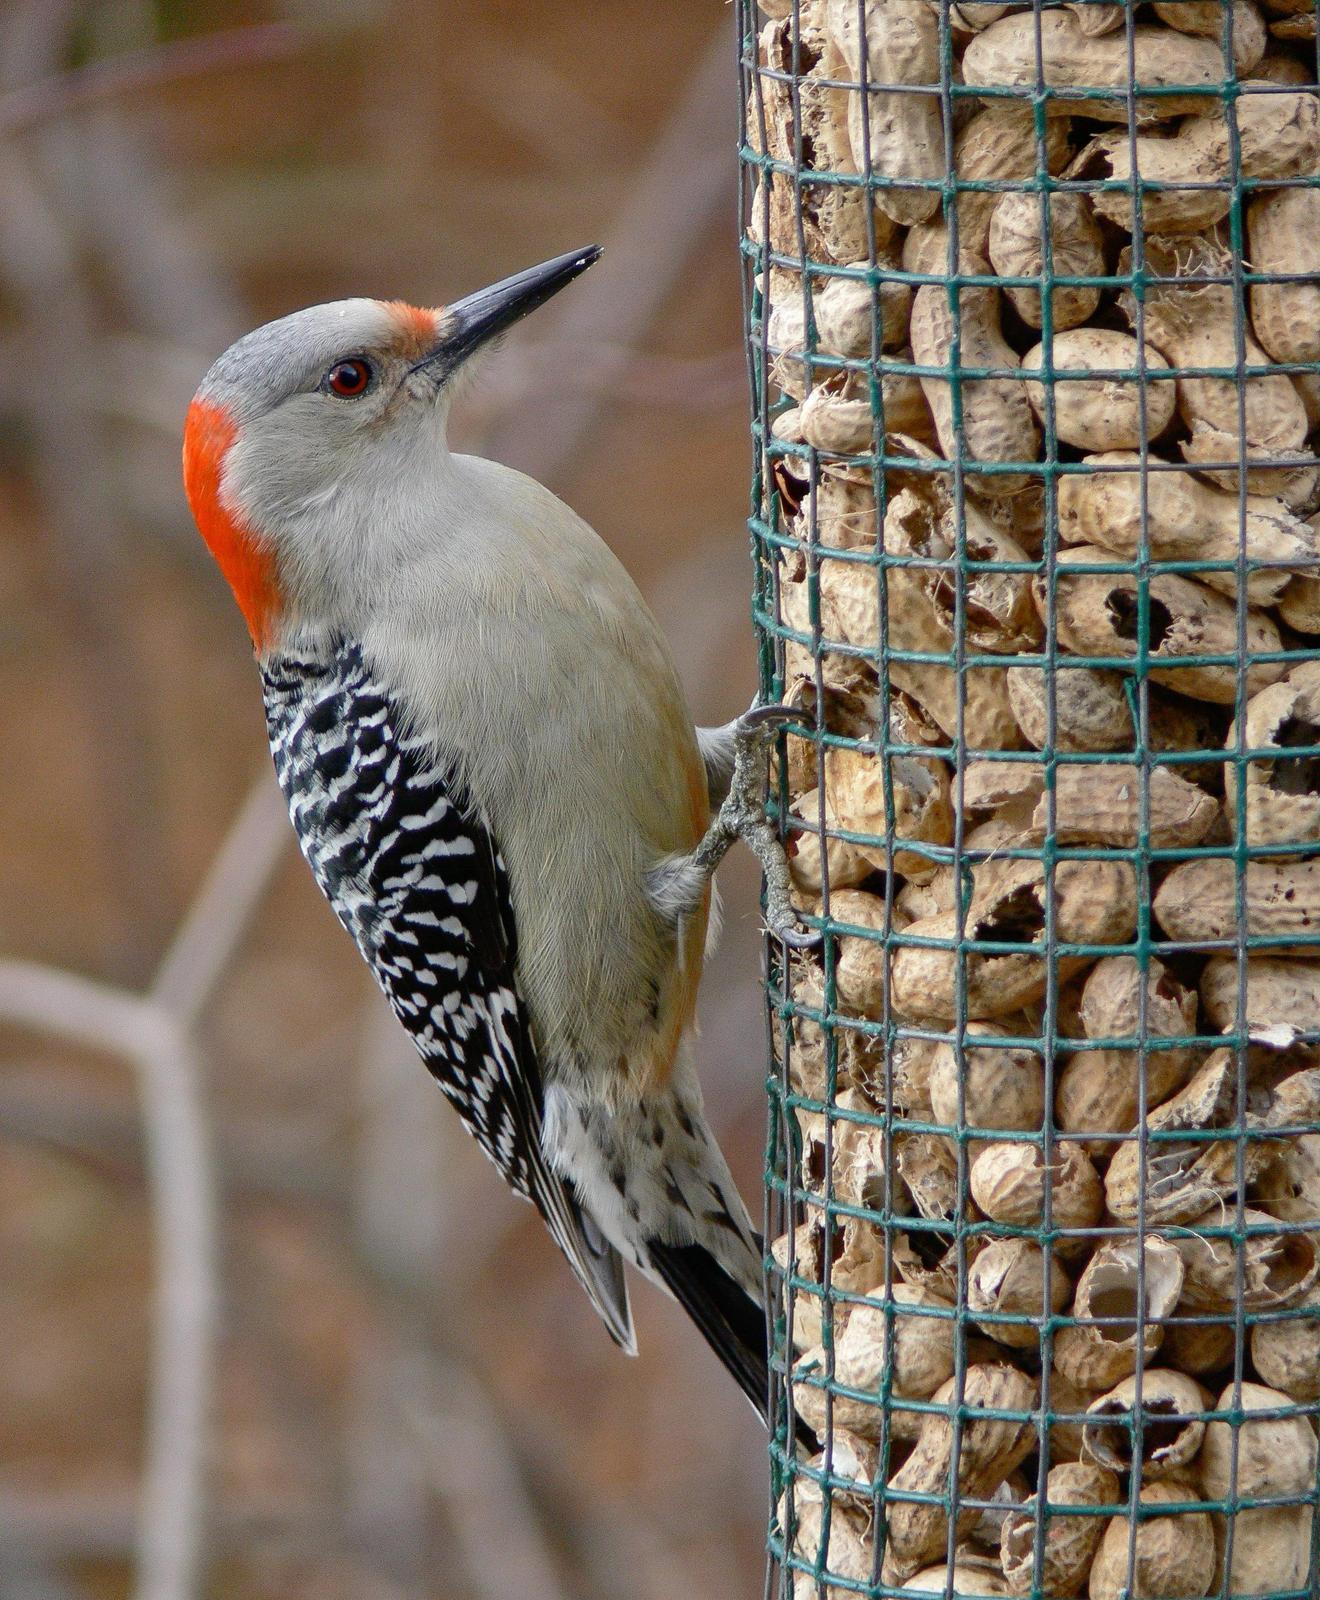 Red-bellied Woodpecker Photo by Tom Ford-Hutchinson